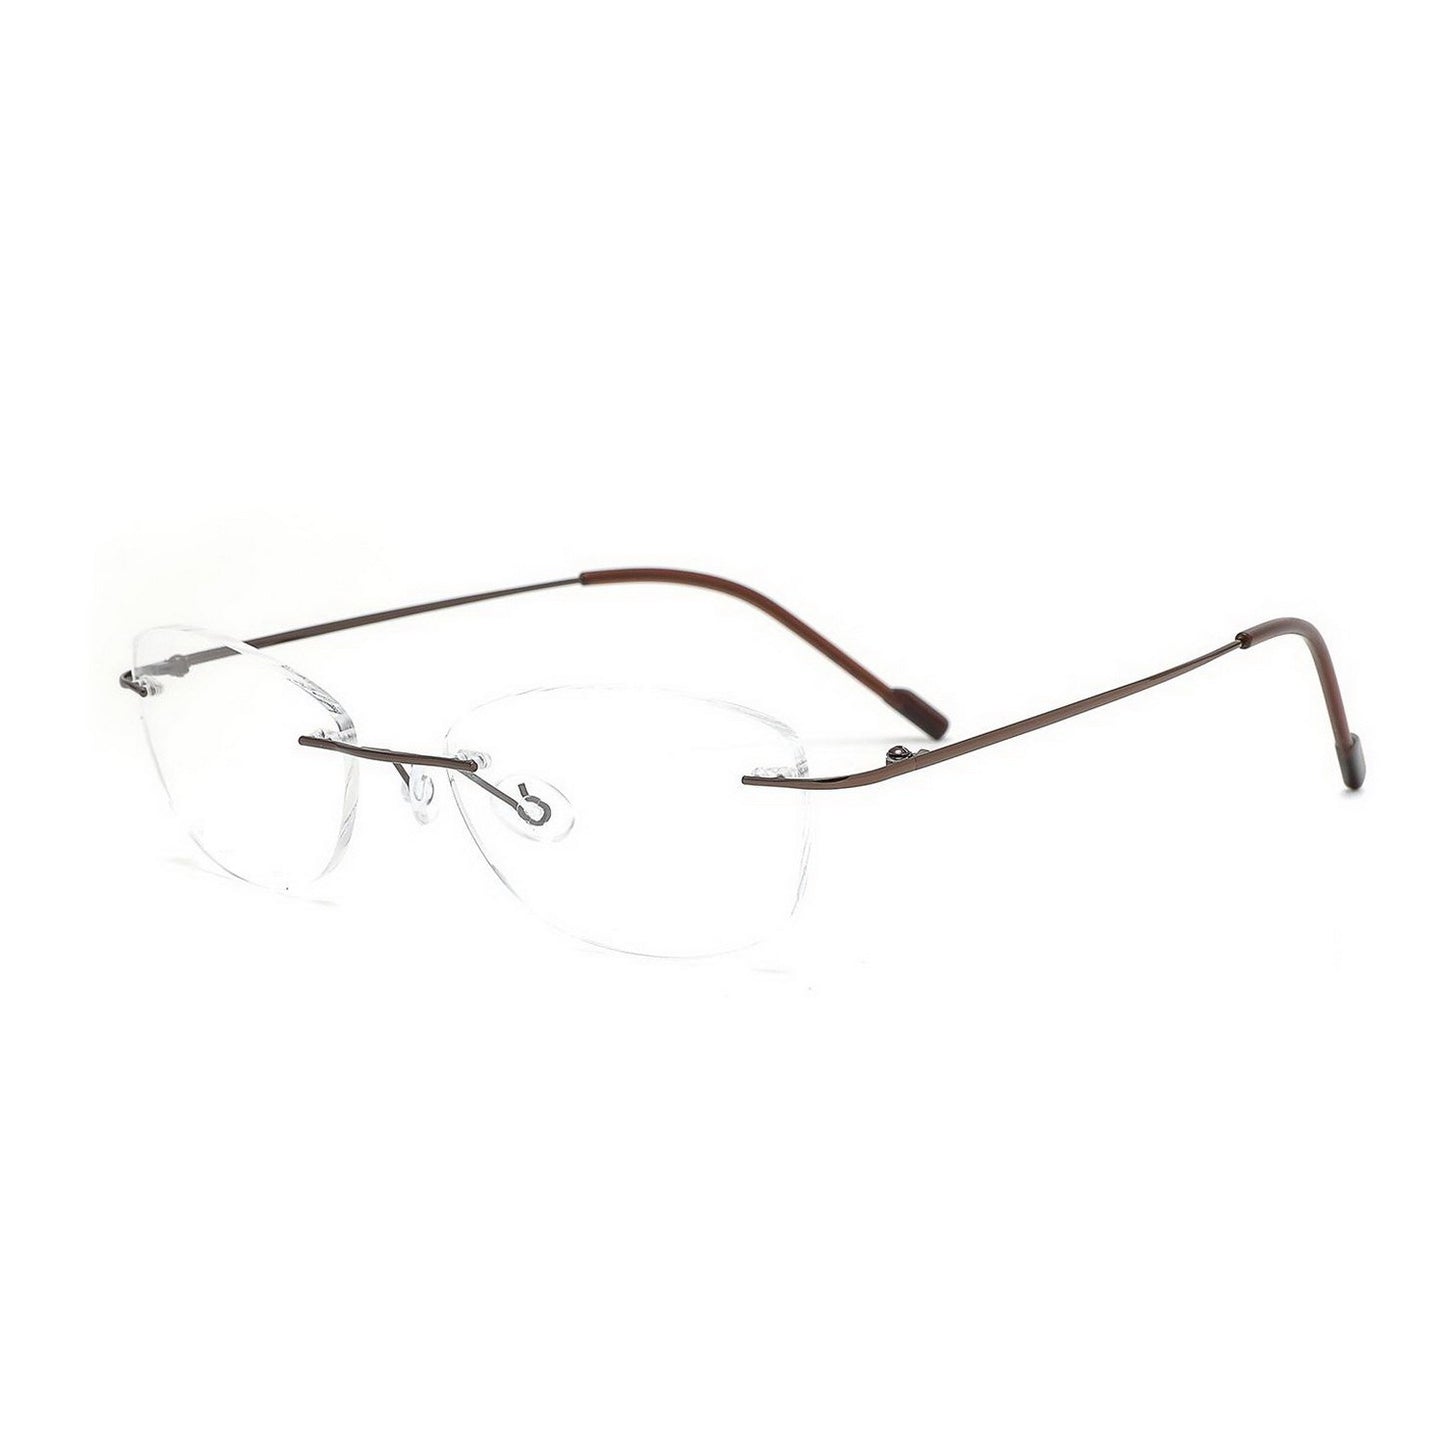 Chic & Fashionable Cat Eye Spectacle Frames